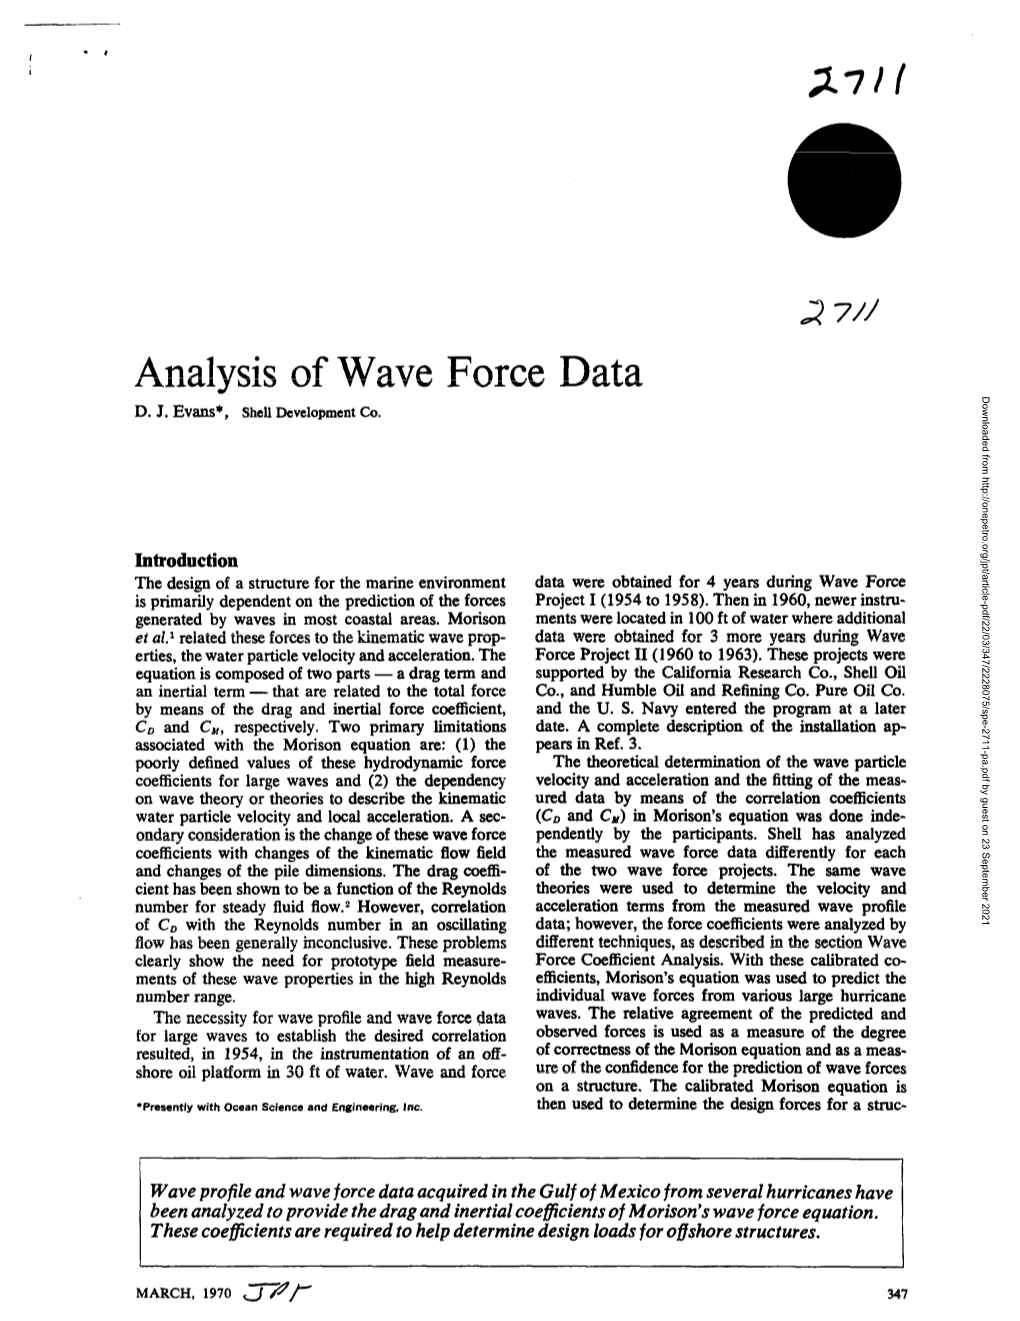 Analysis of Wave Force Data